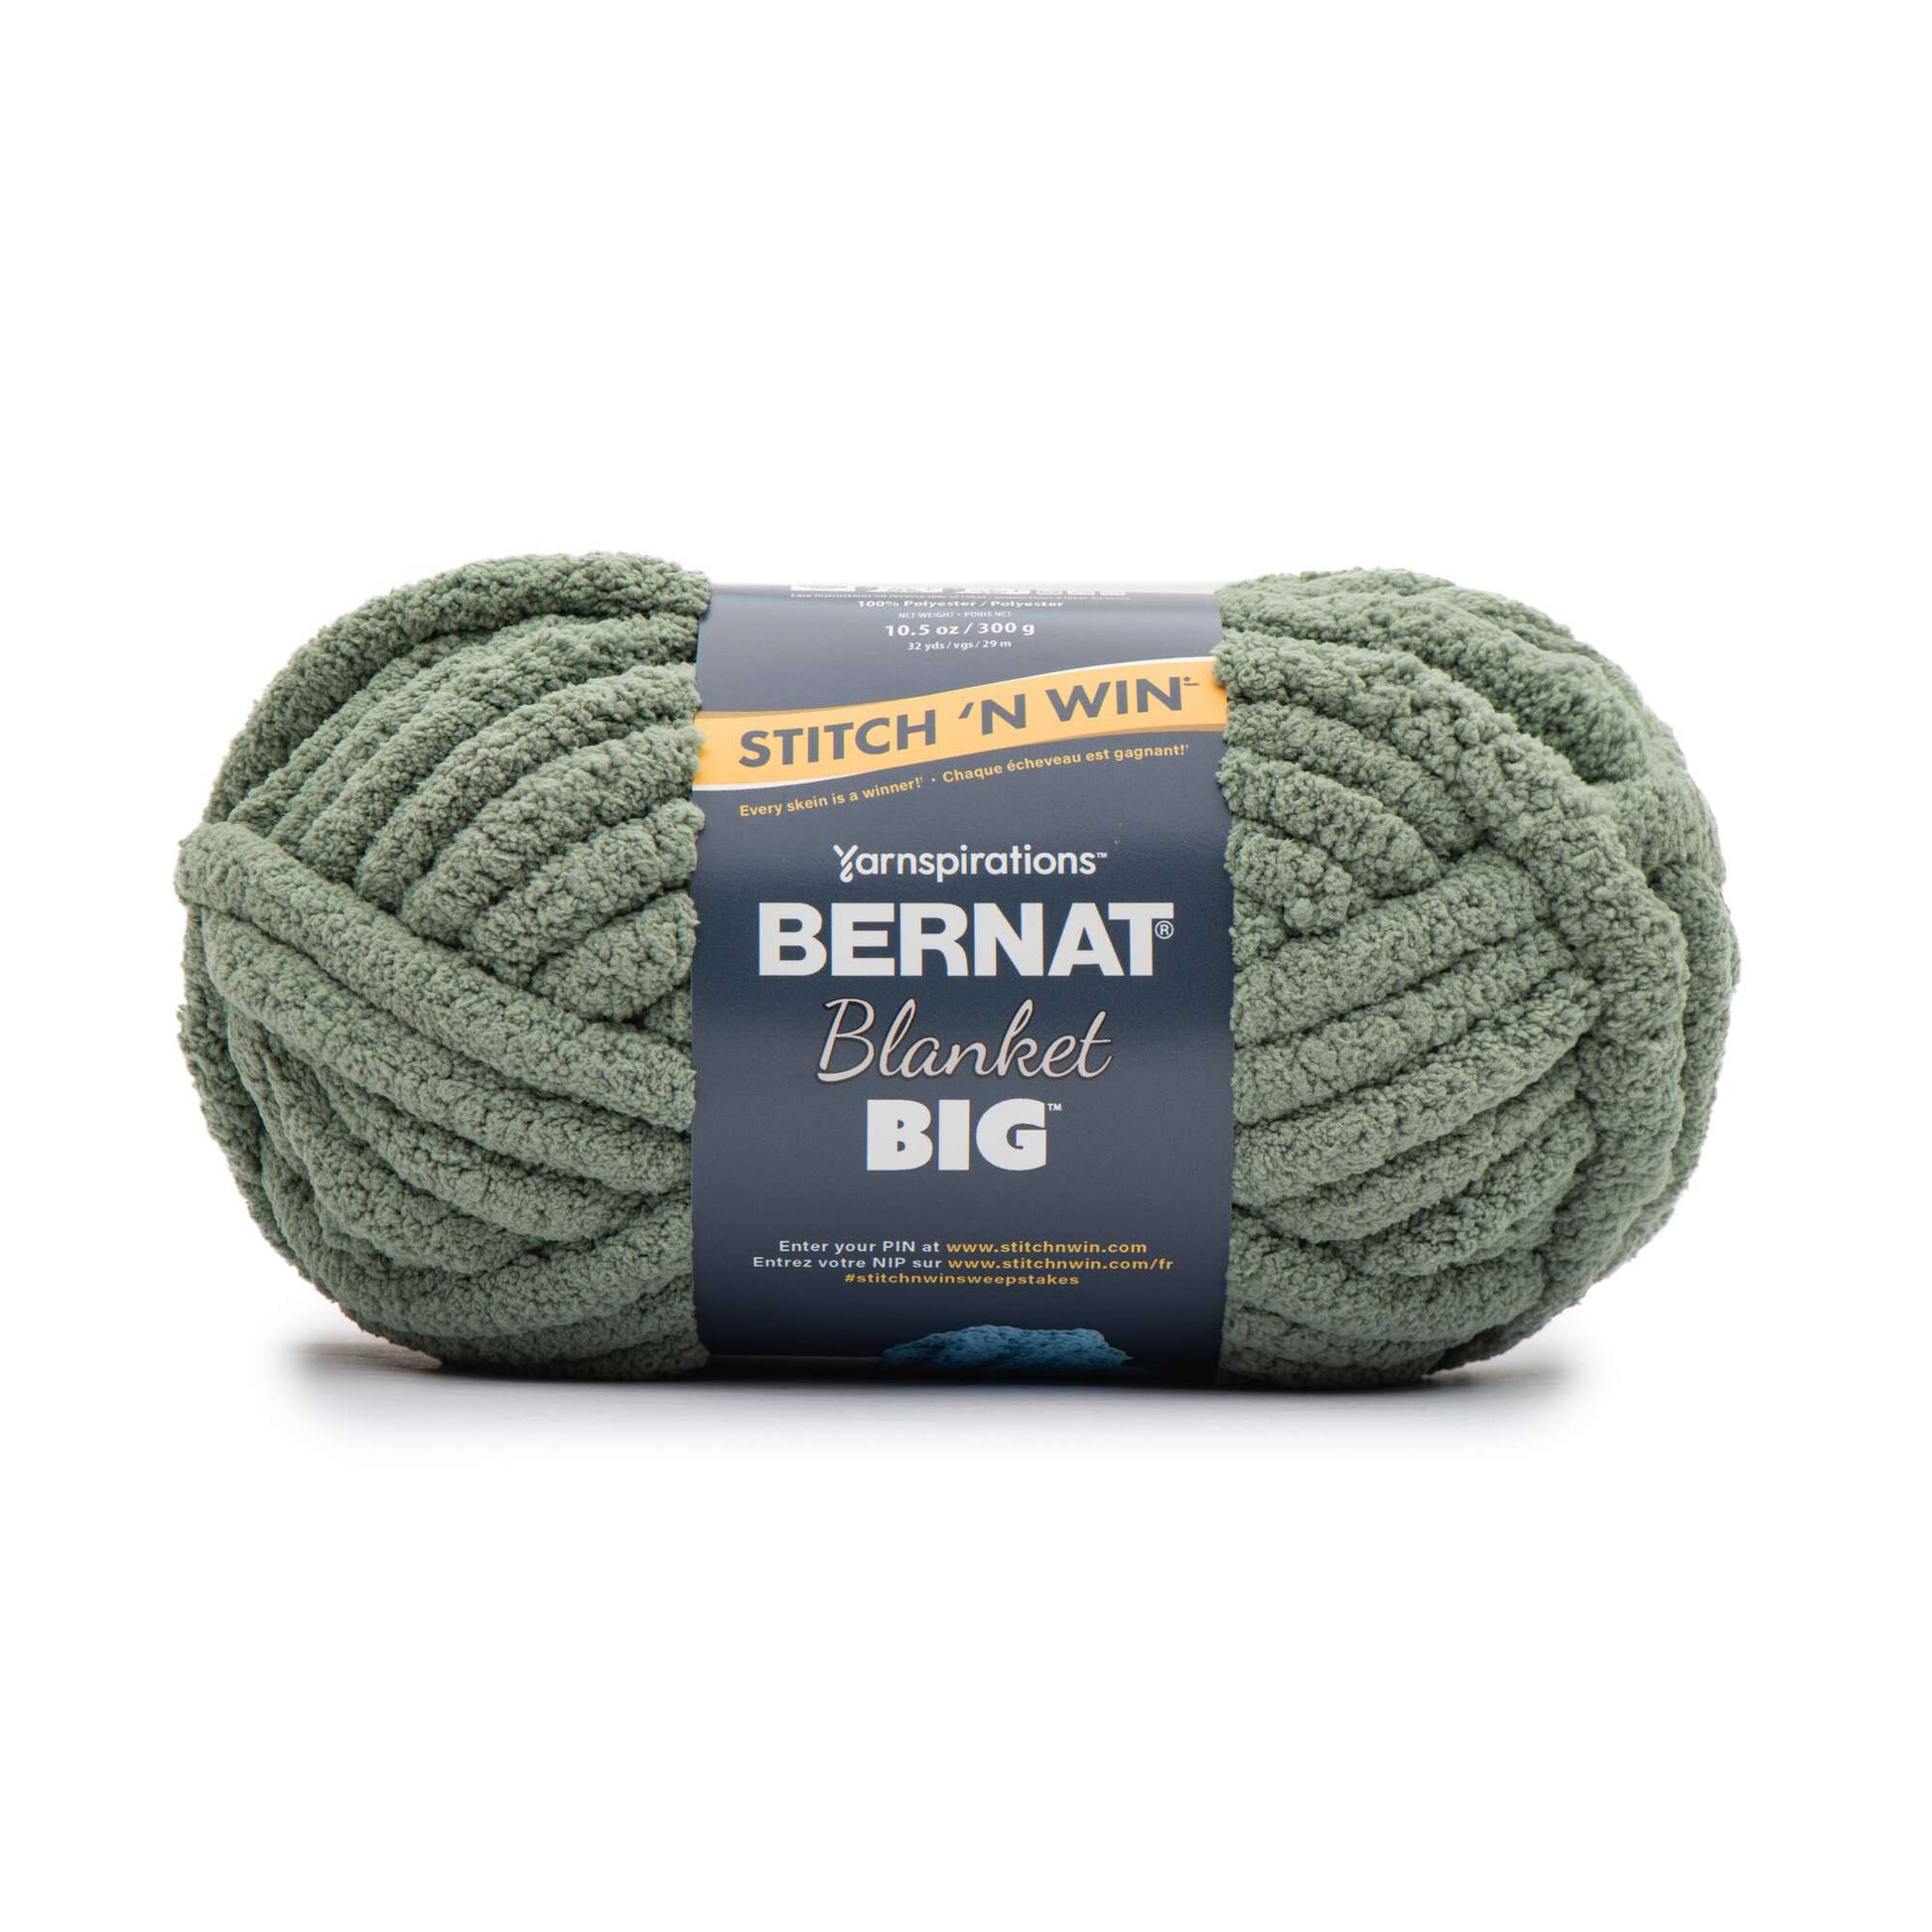 Bernat Blanket Yarn - Big Ball 10.5 oz - 2 Pack with Pattern Cards in Color North Sea